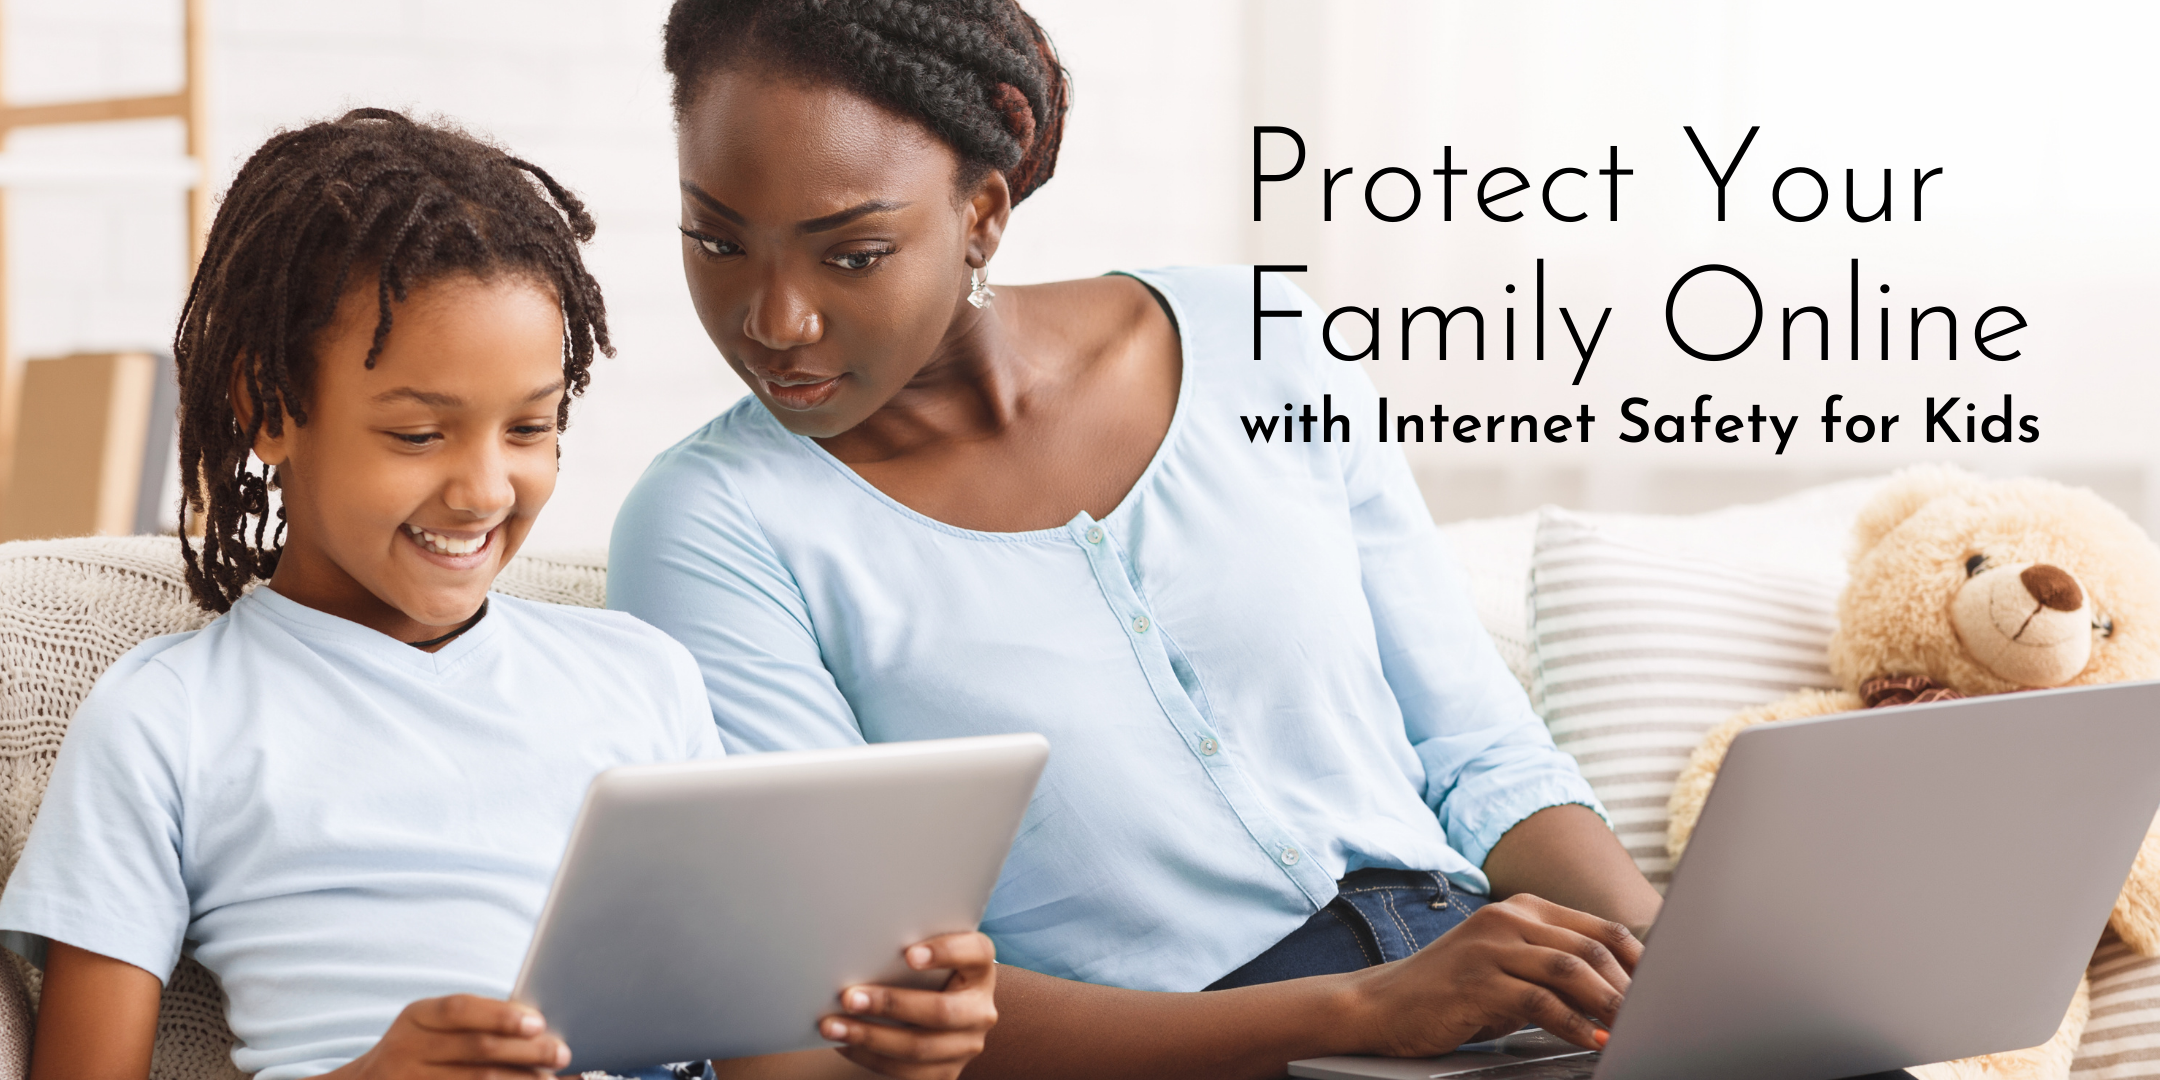 Protect Your Family Online with Internet Safety for Kids